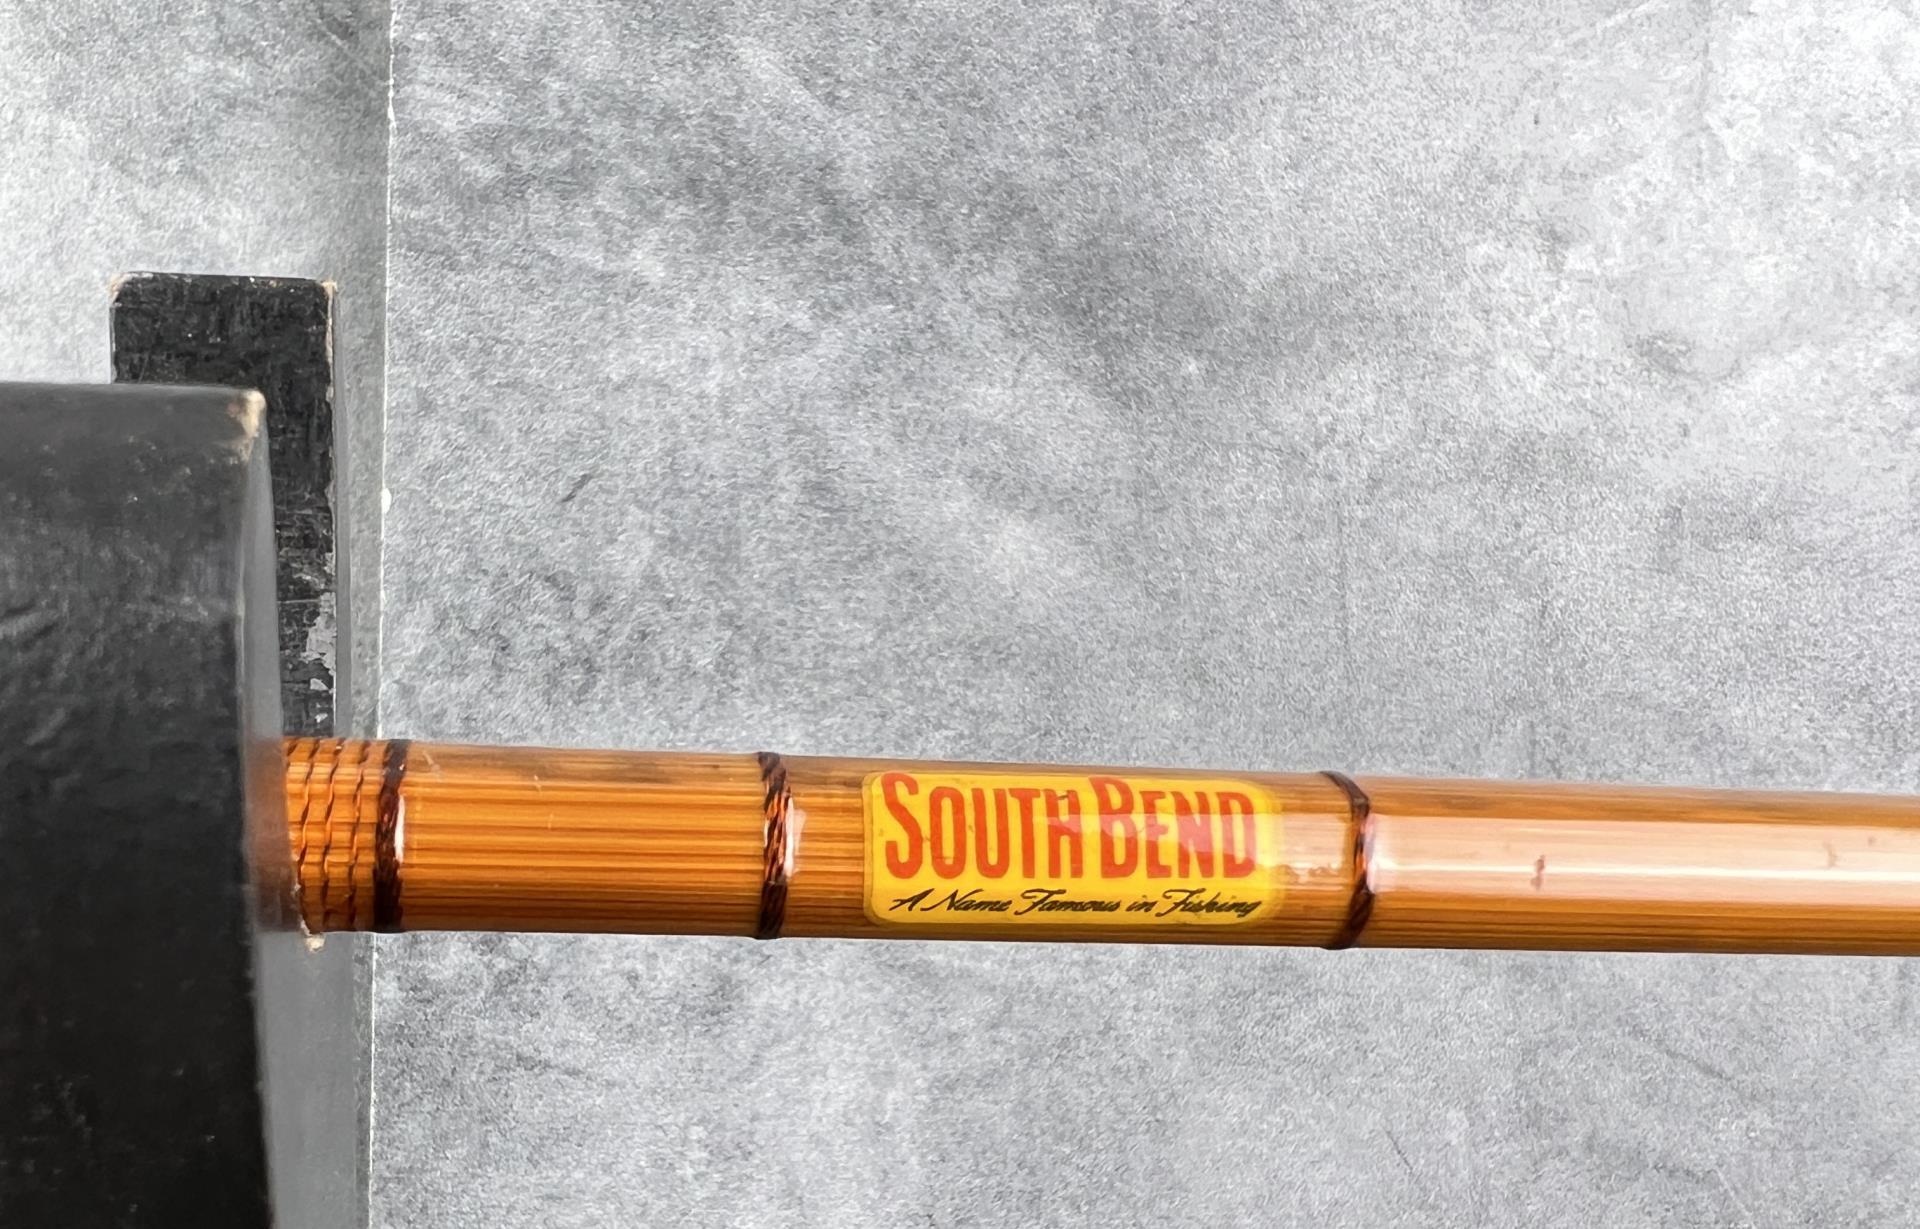 South Bend 346 8 1/2' Bamboo Fly Fishing Rod